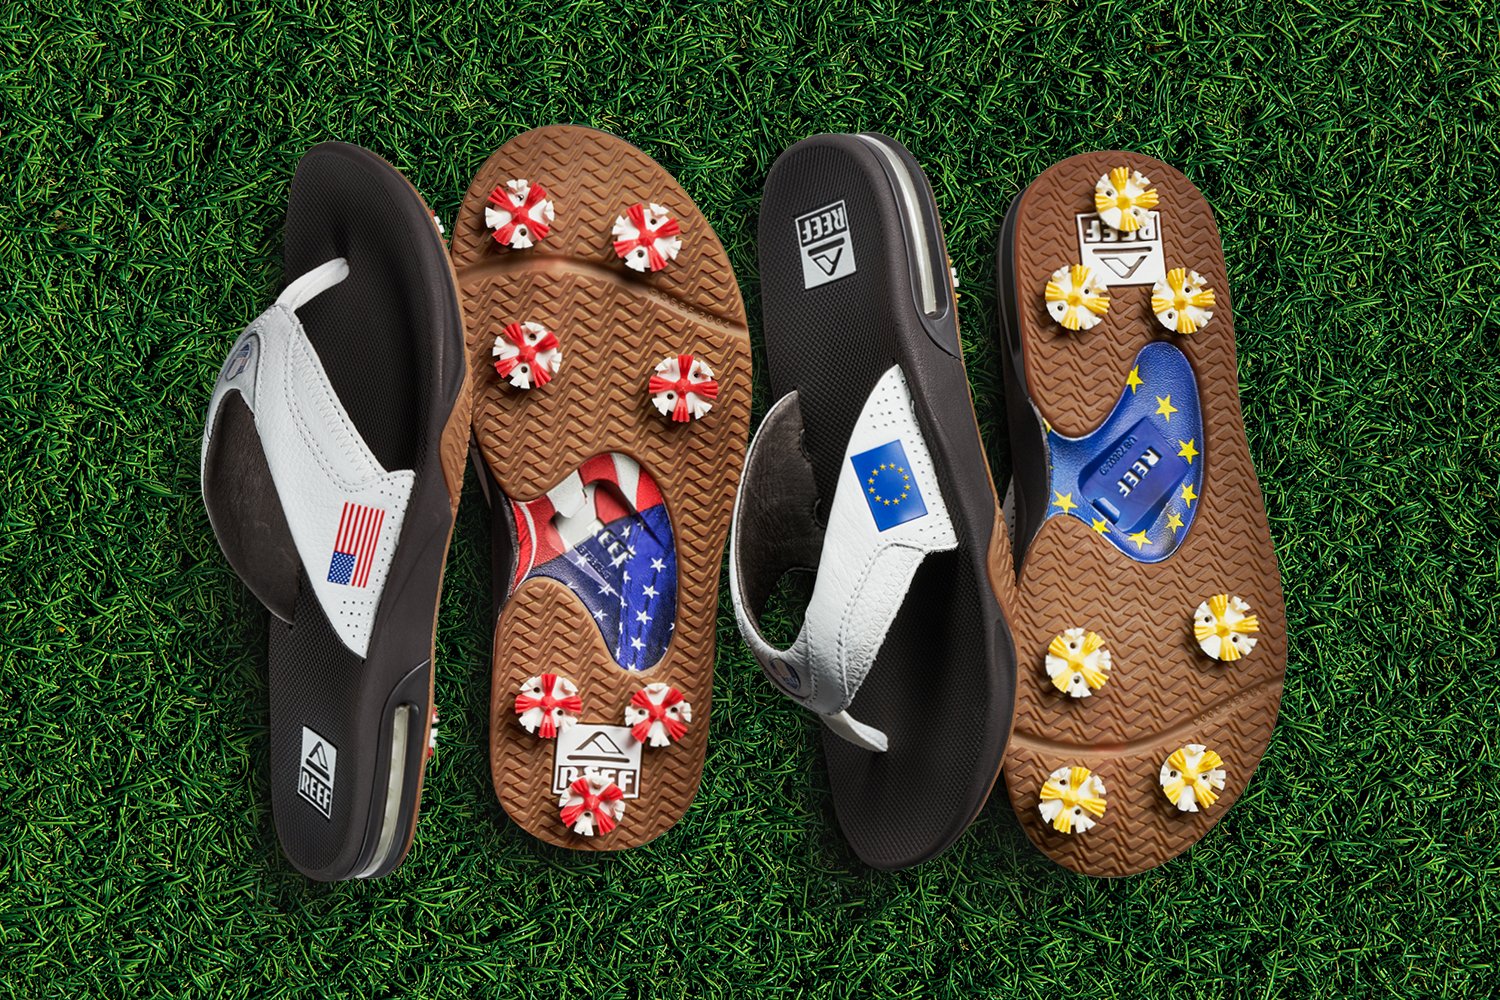 The sandal that keeps selling out is in stock two new Ryder Cup-inspired versions | Golf Equipment: Clubs, Balls, Bags | Golf Digest